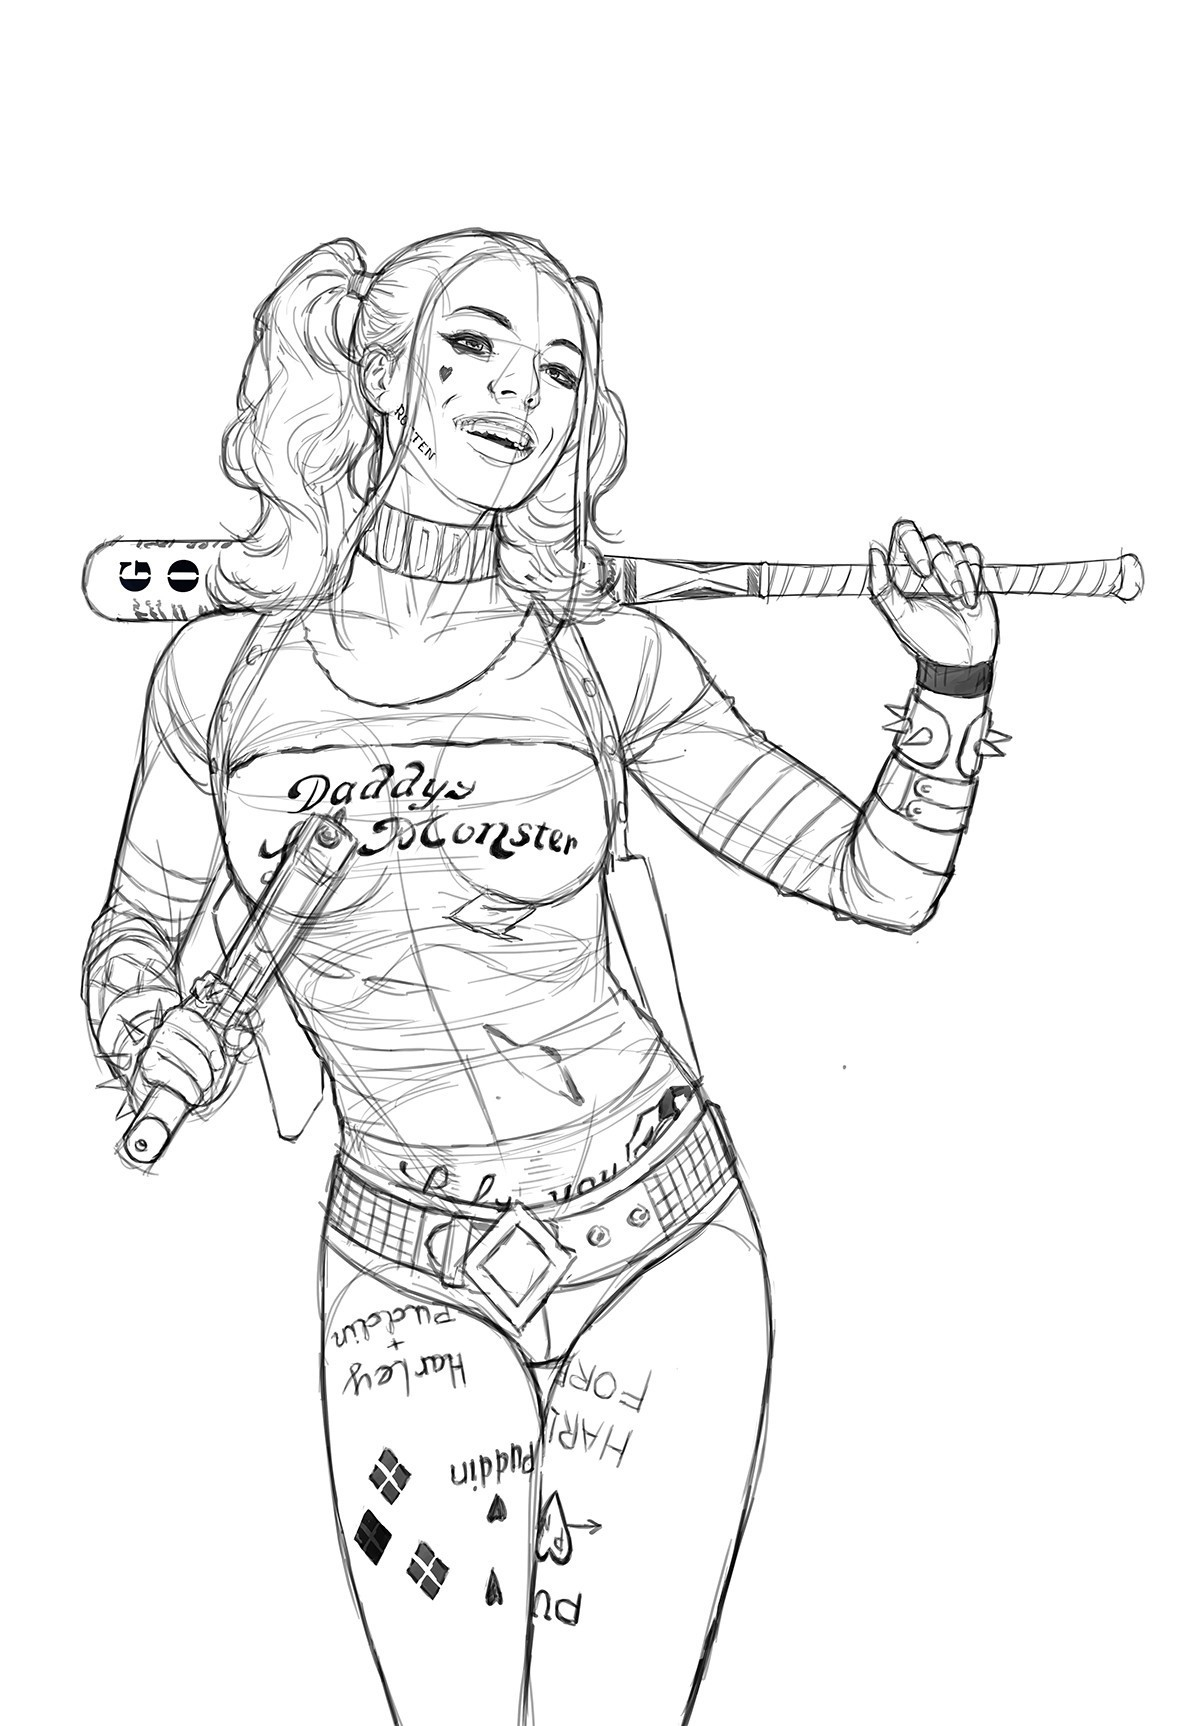 Harley Quinn Coloring Pages To Print Coloring Pages Harley Quinn Coloring Pages Inspirationa Joker And